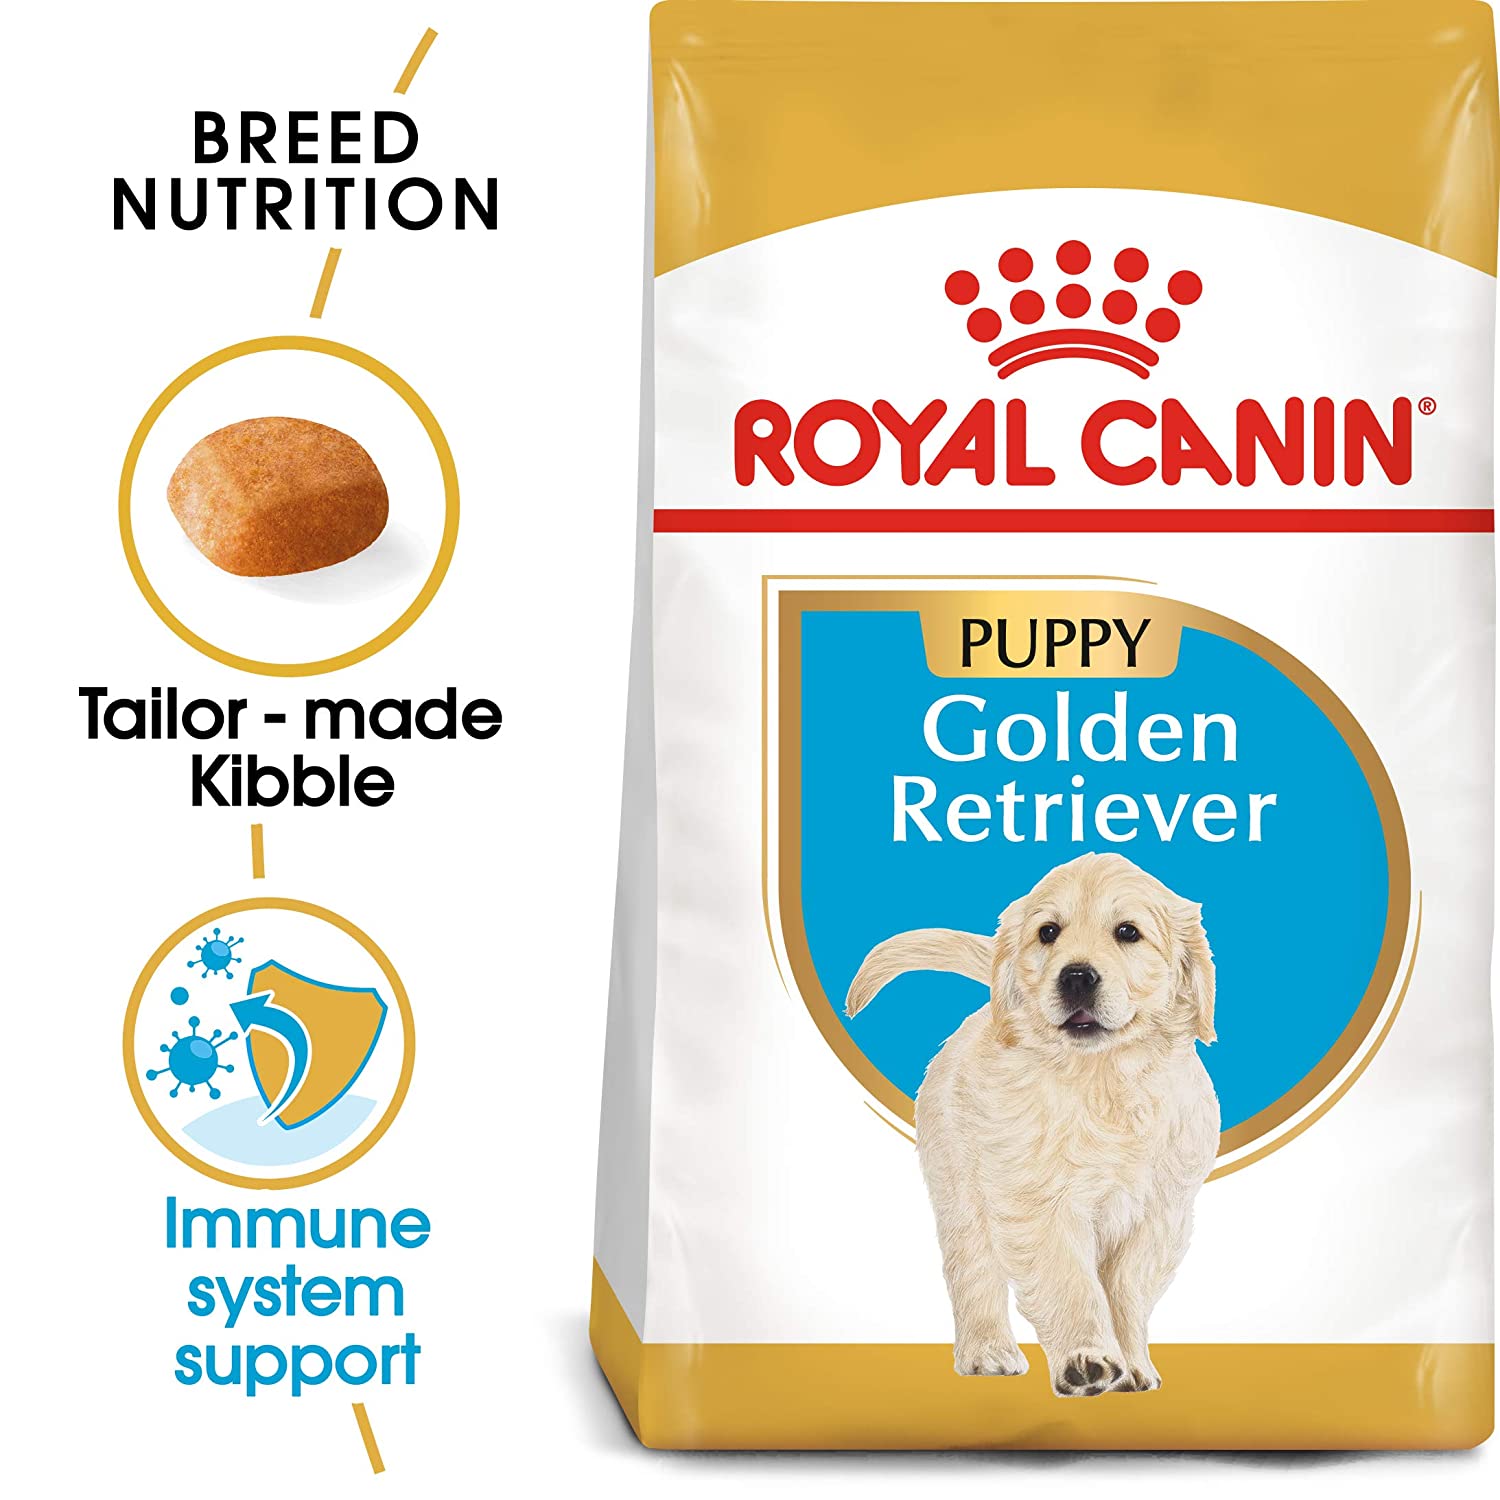 Royal Canin Golden Retriever Dry Food (2-15 months)Puppy 